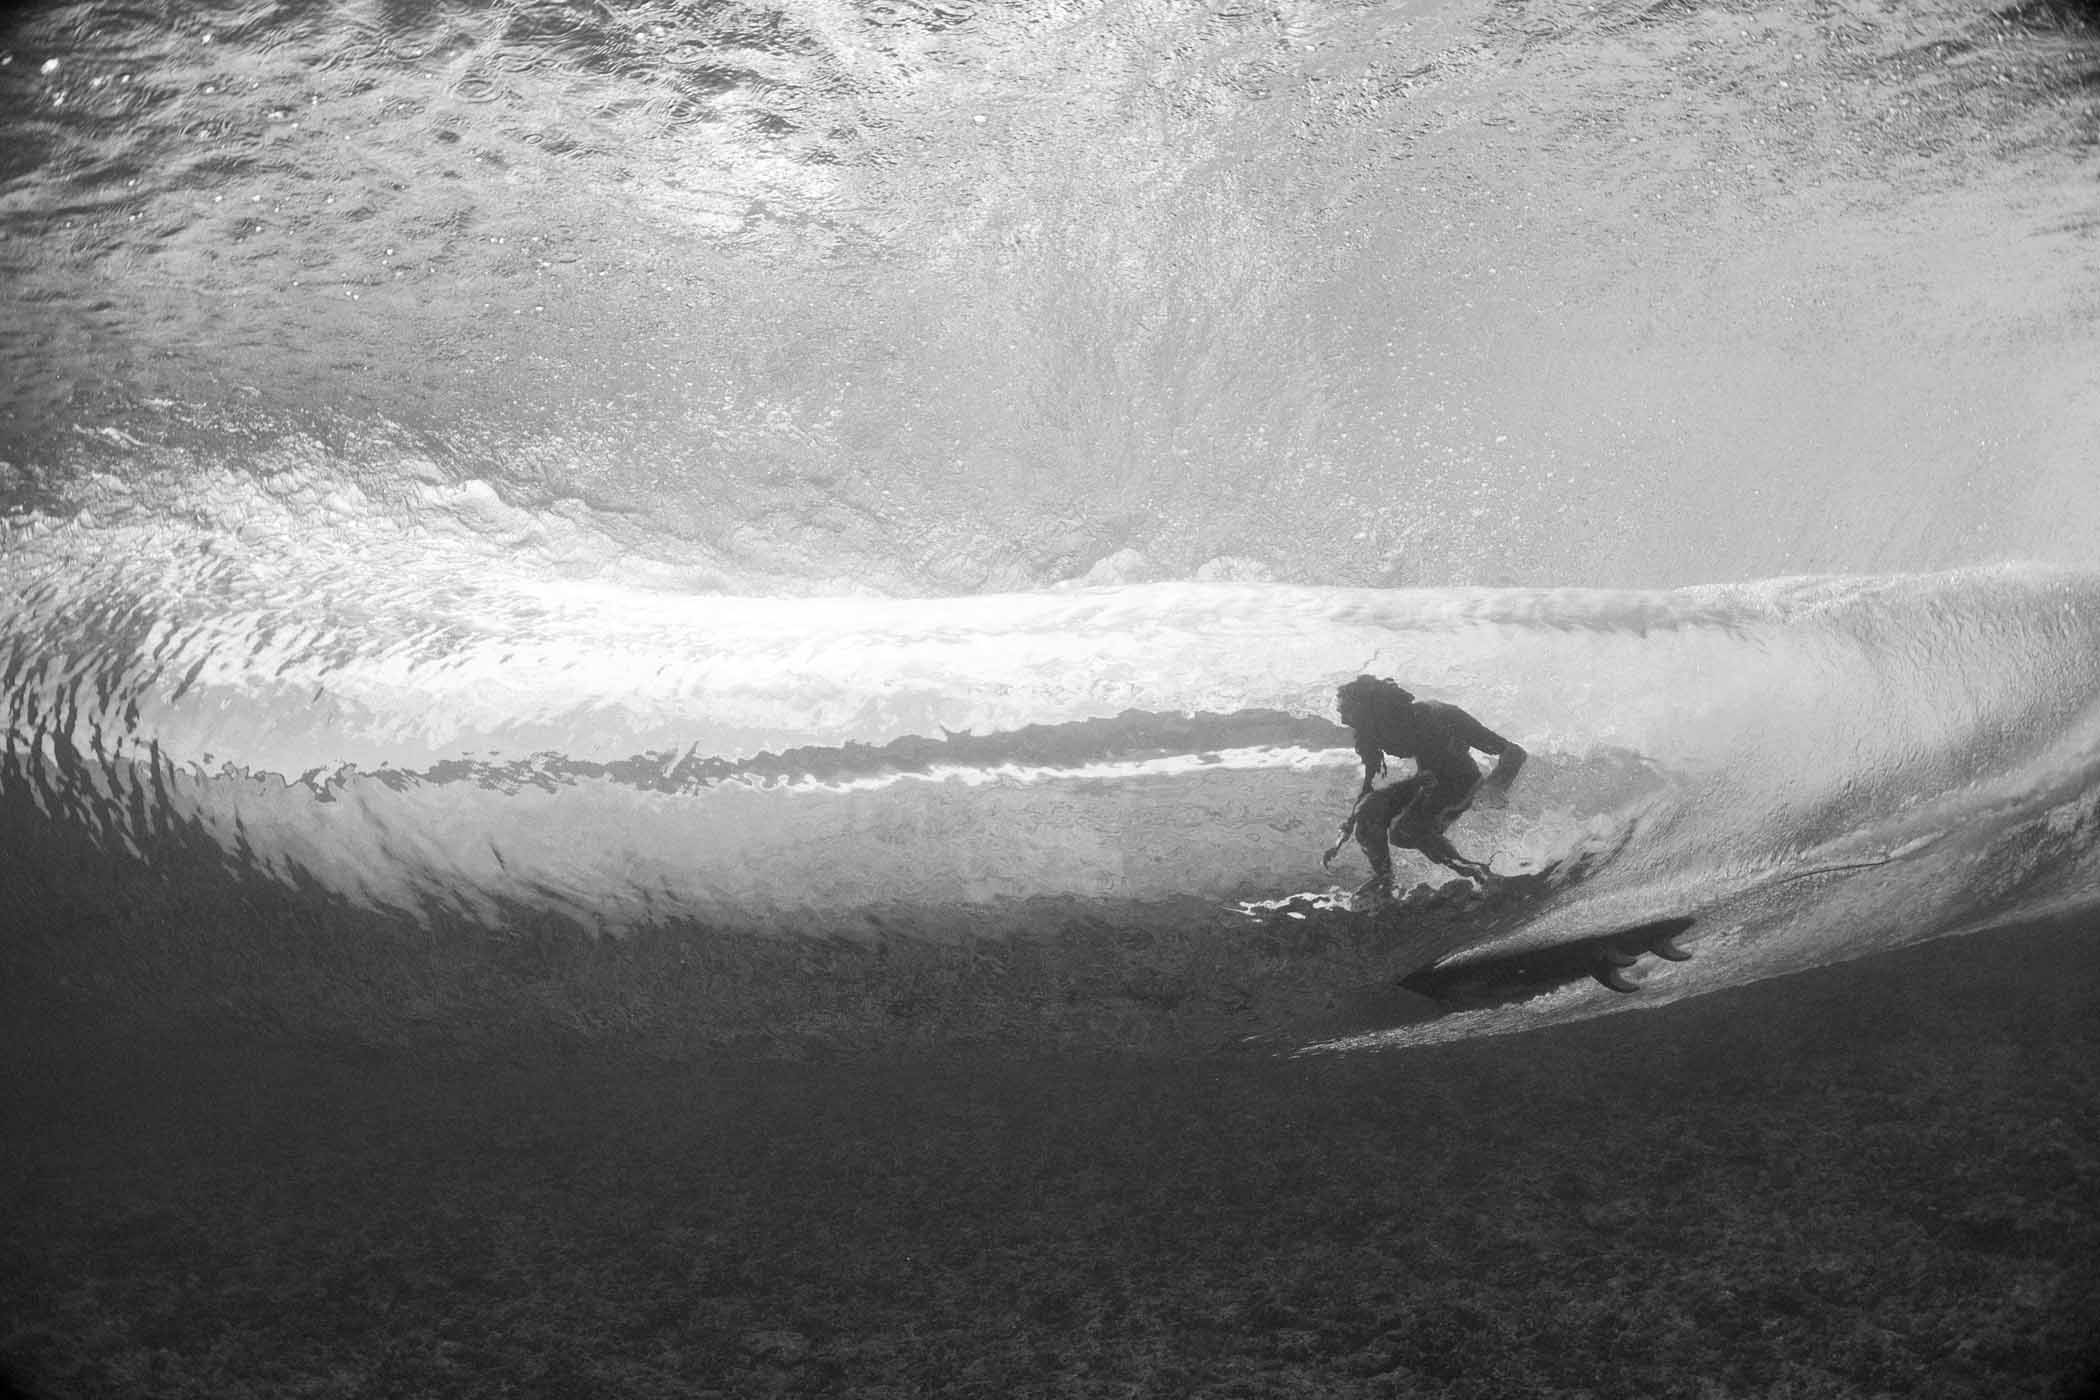 Craig Anderson on day three of an eight-day, 18,000 mile swell chase that started in Tahiti and finished in Alaska, on the same swell. Photo: Glaser.